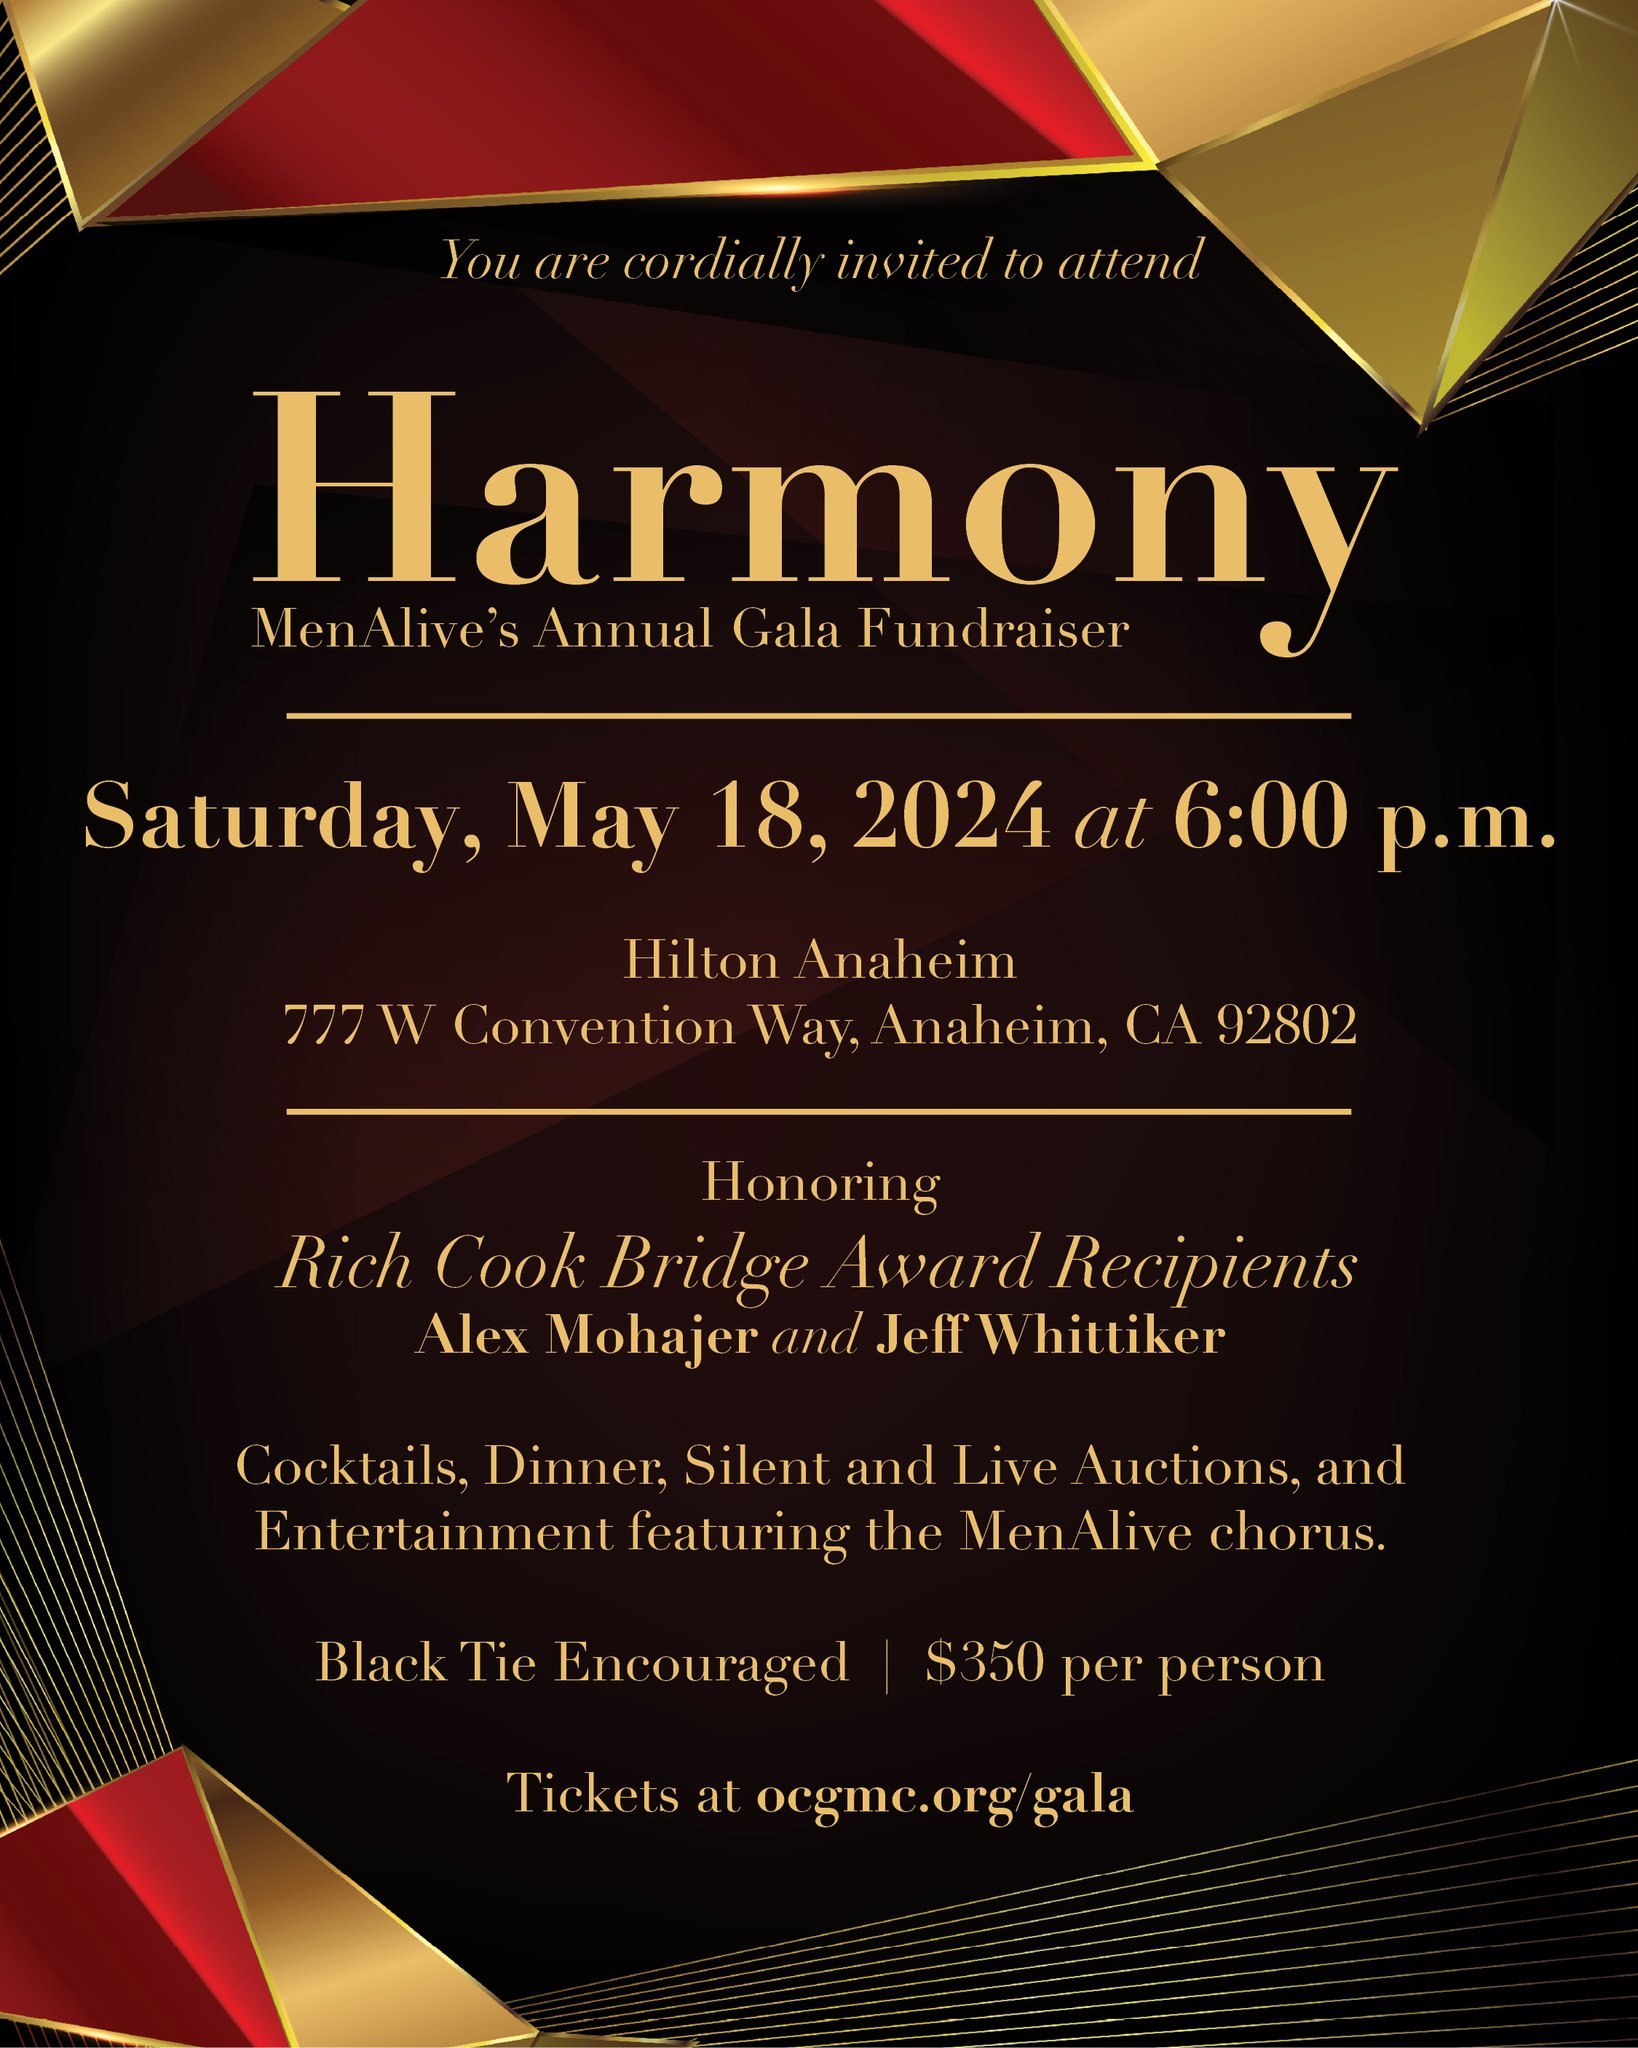 Mark your calendars and join MenAlive for our annual Harmony Gala on Saturday, May 18, at the Hilton Anaheim. It'll be an evening of great company, awesome entertainment, and scrumptious food! See the link in the bio for tickets and details.

#menali